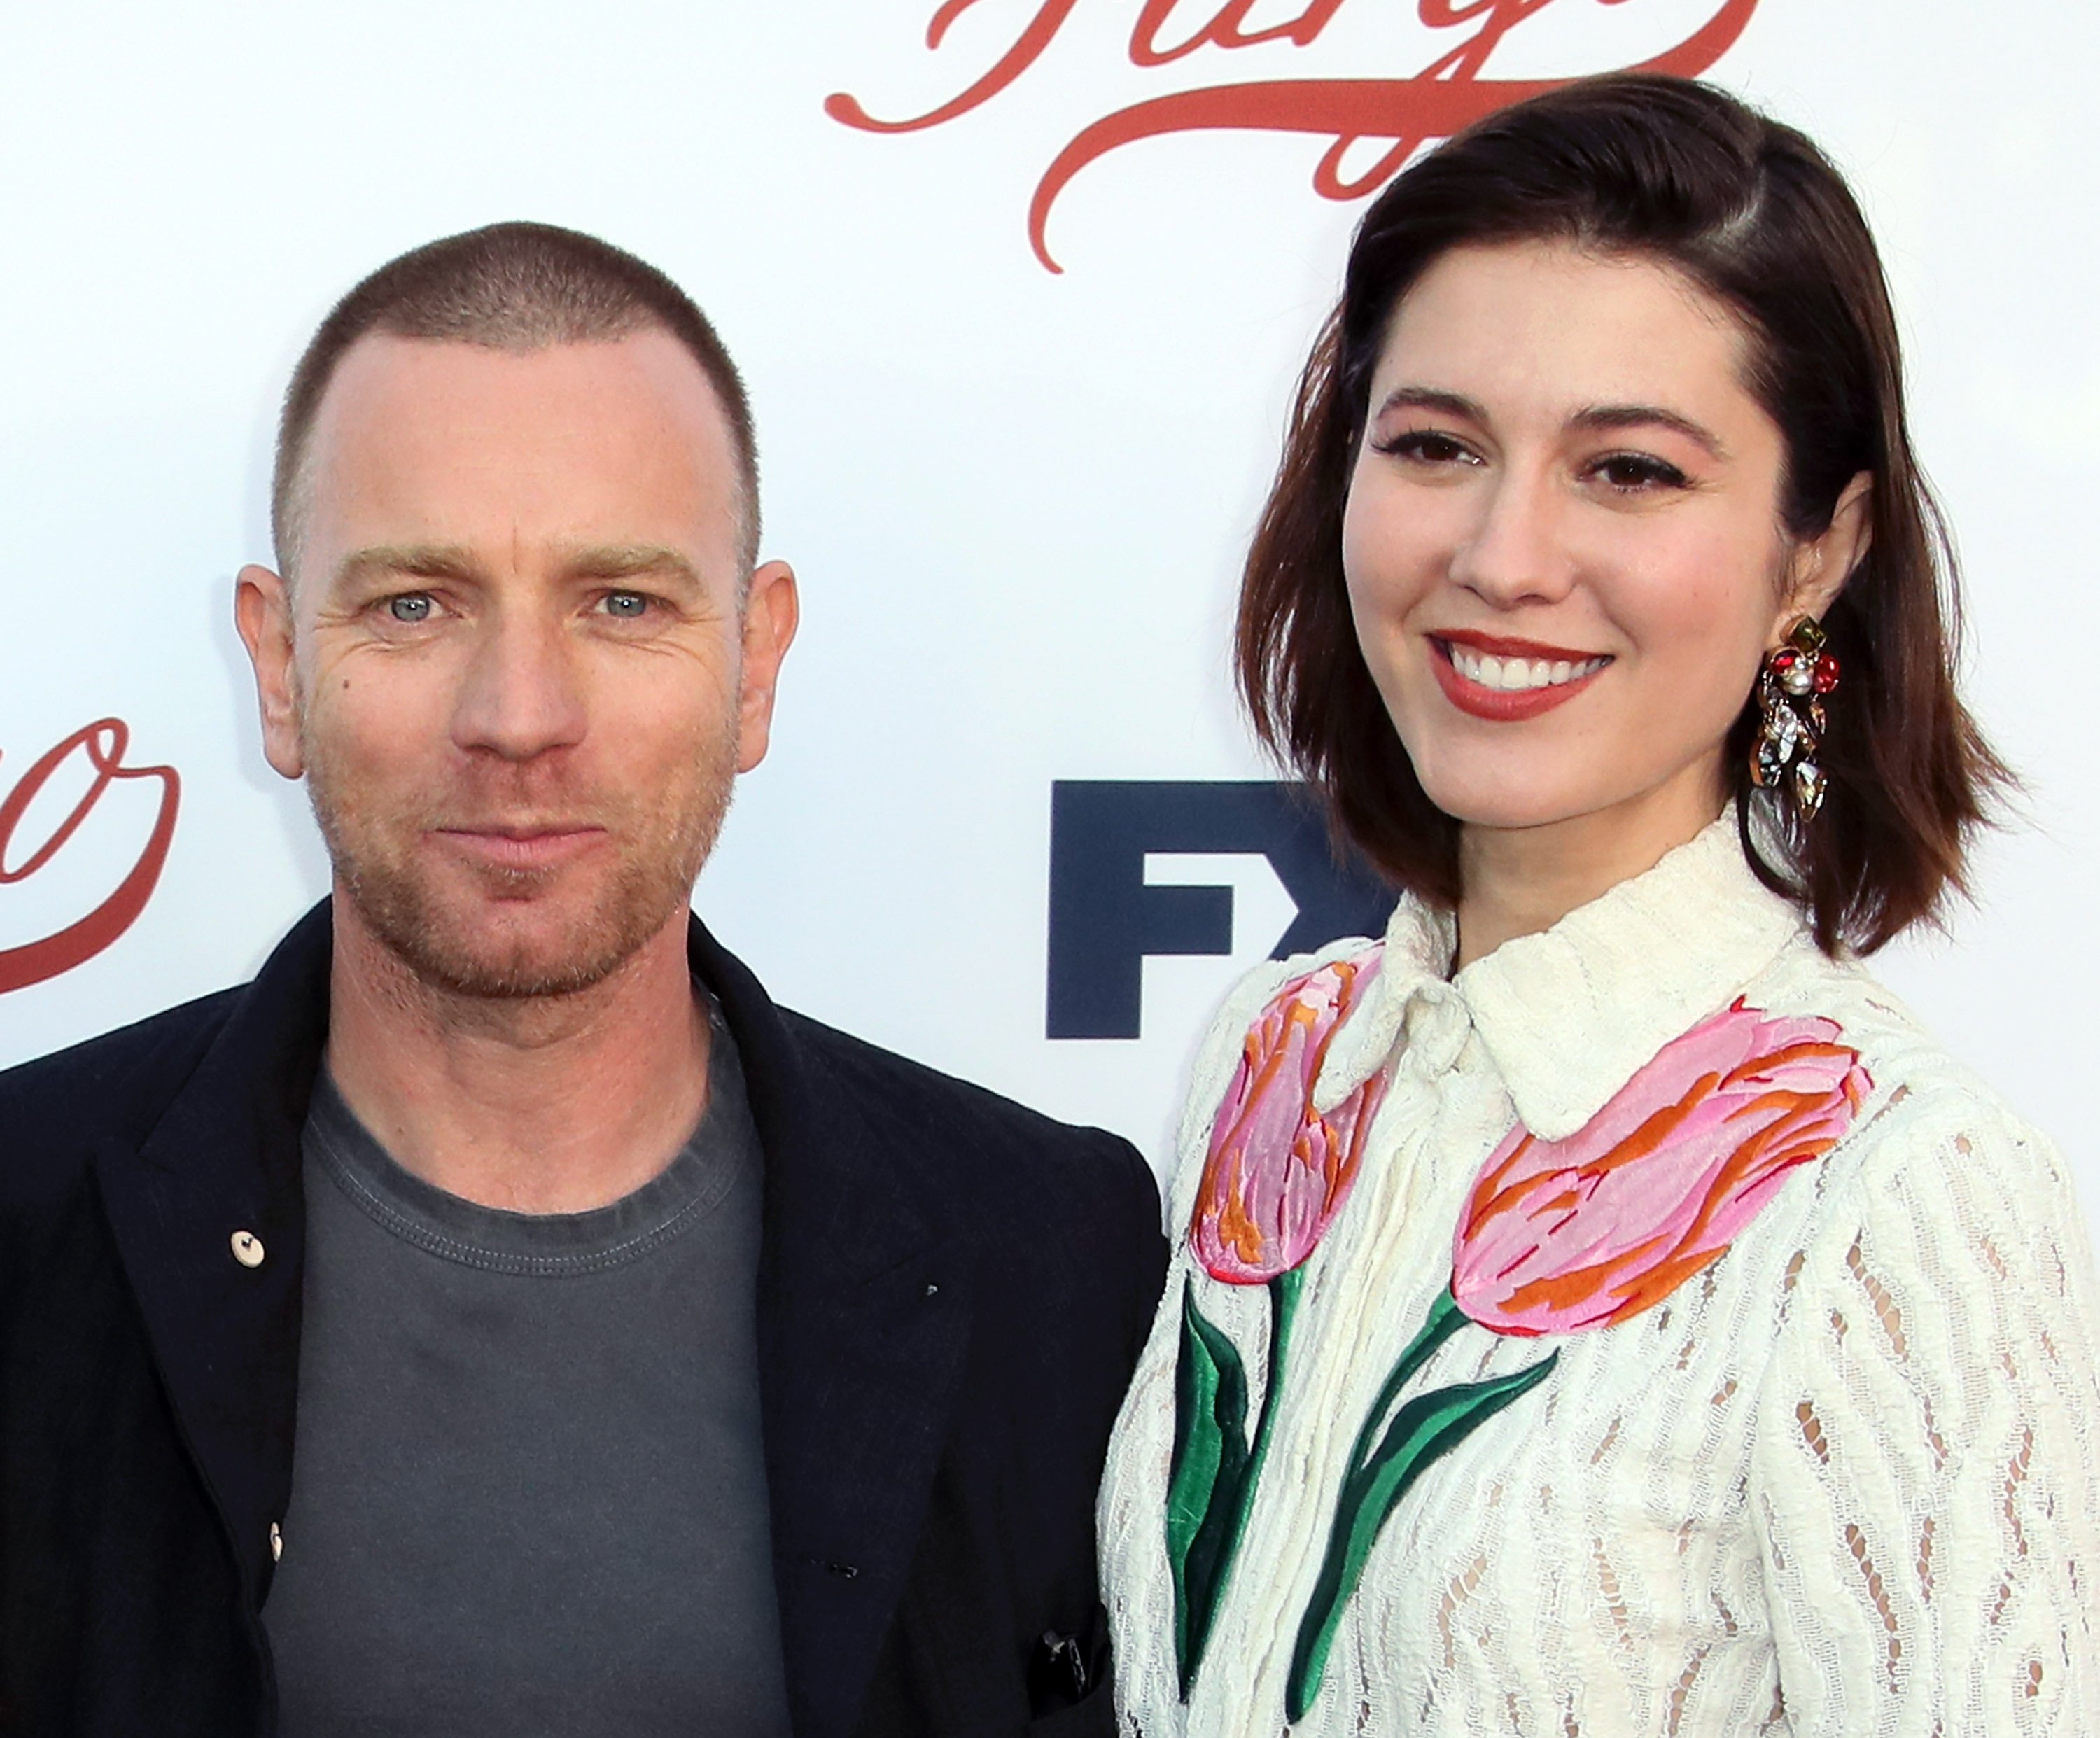 Actors Ewan McGregor and Mary Elizabeth Winstead attend FX's "Fargo" For Your Consideration event at Saban Media Center on May 11, 2017 in North Hollywood, California | Photo: Getty Images